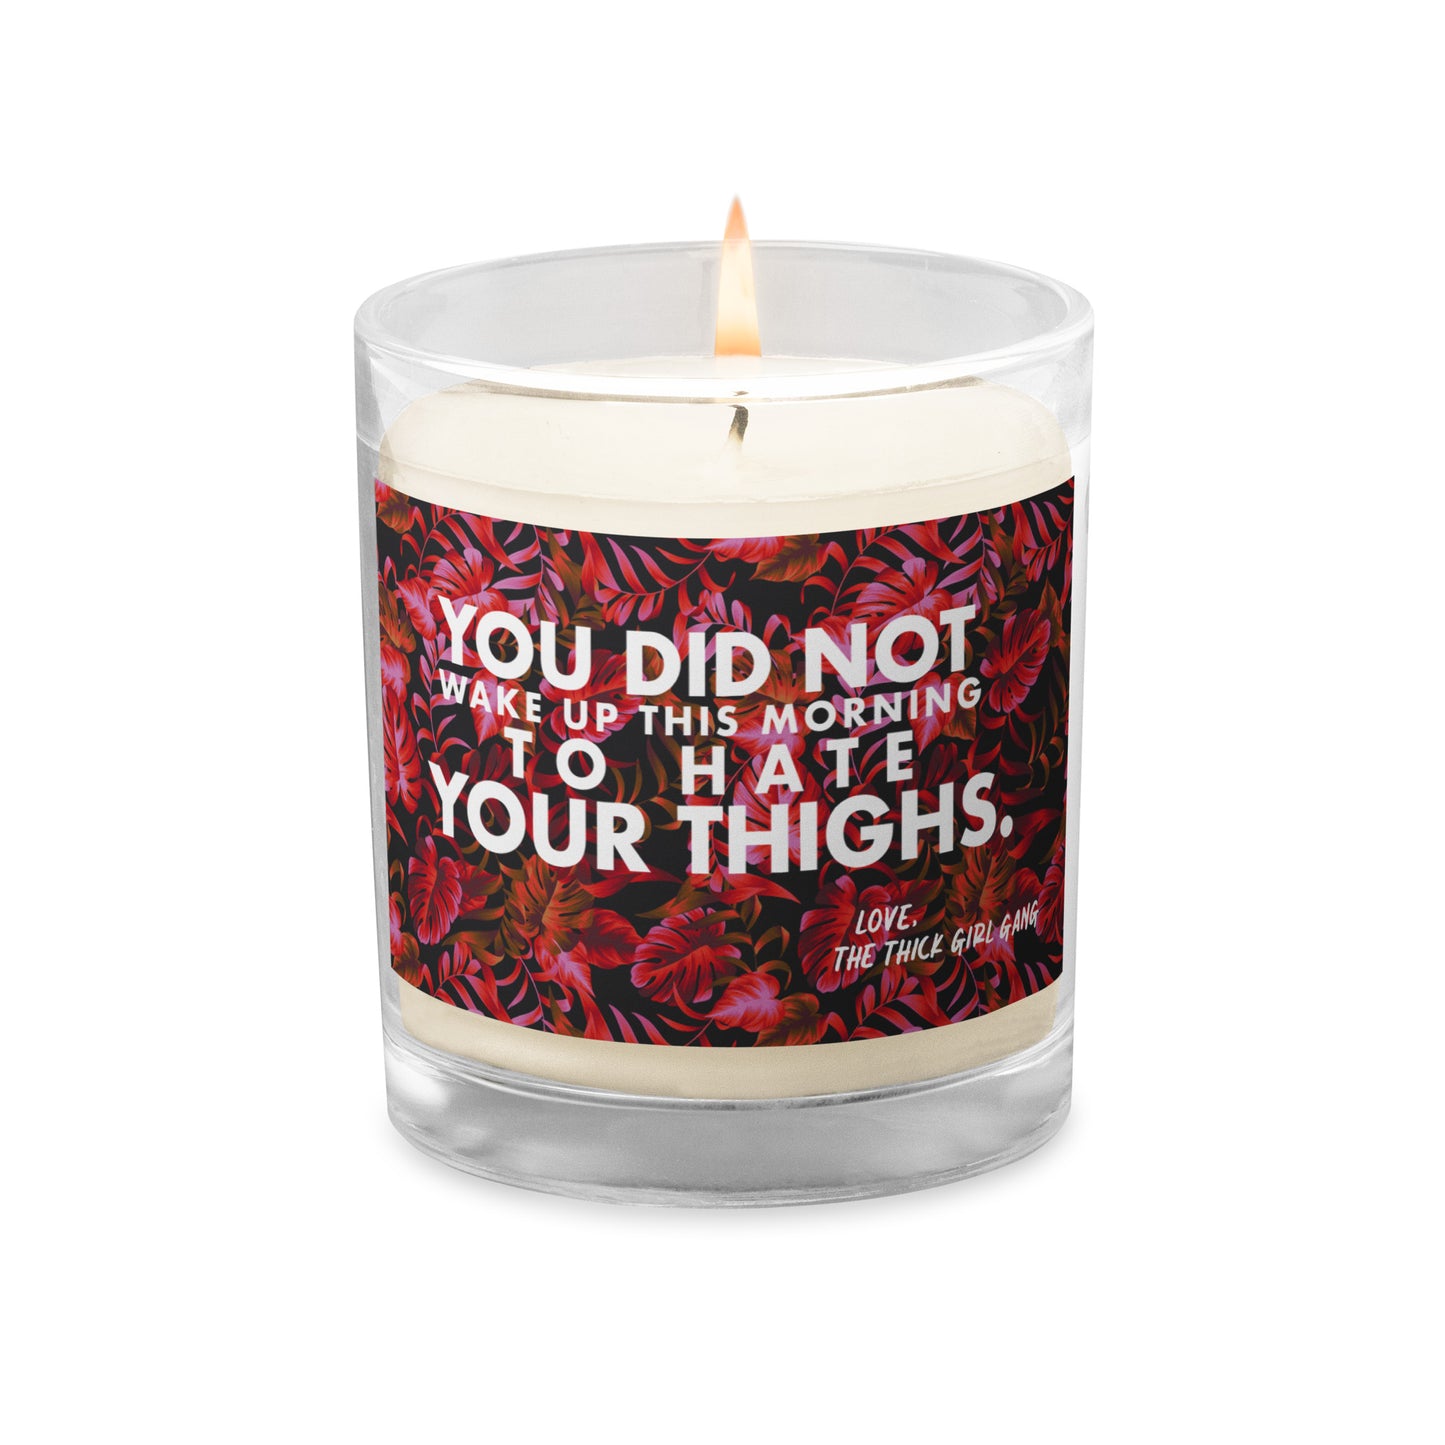 The You Did Not Wake Up This Morning To Hate Your Thighs Candle